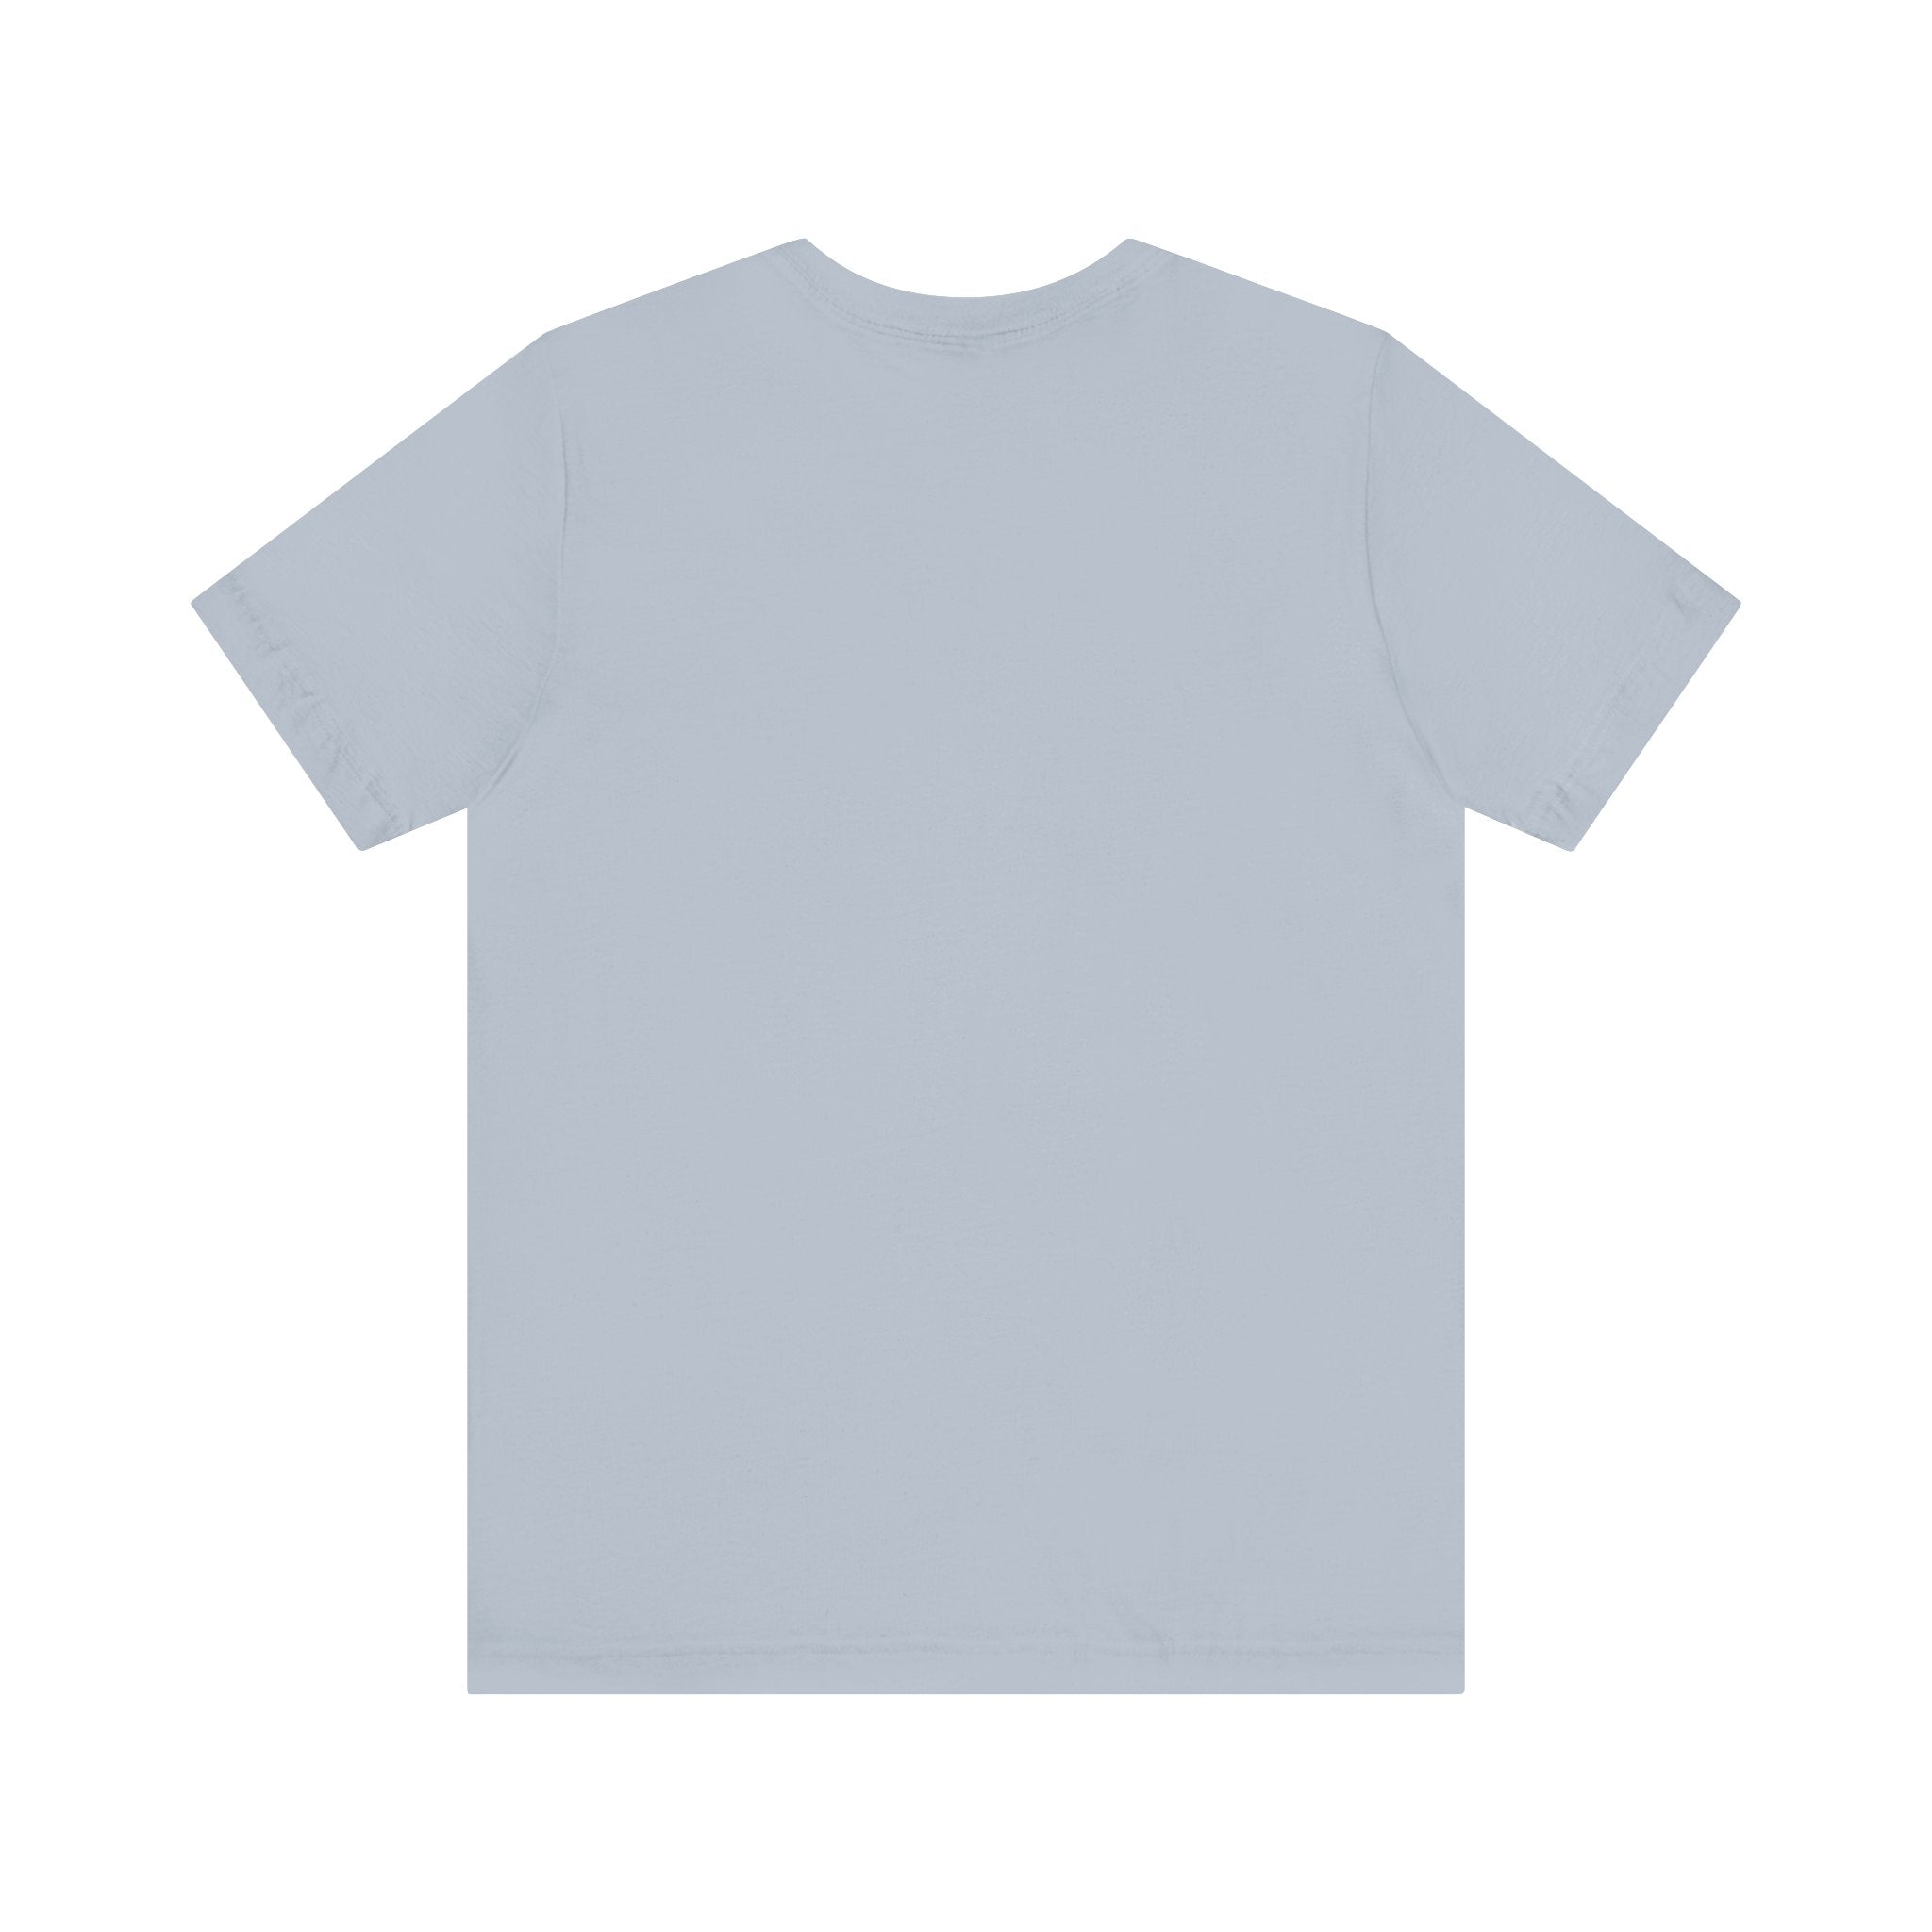 A plain light gray short-sleeve Binary Rain Cloud - T-Shirt, crafted from soft ring-spun cotton, is displayed flat, showcasing the back side.